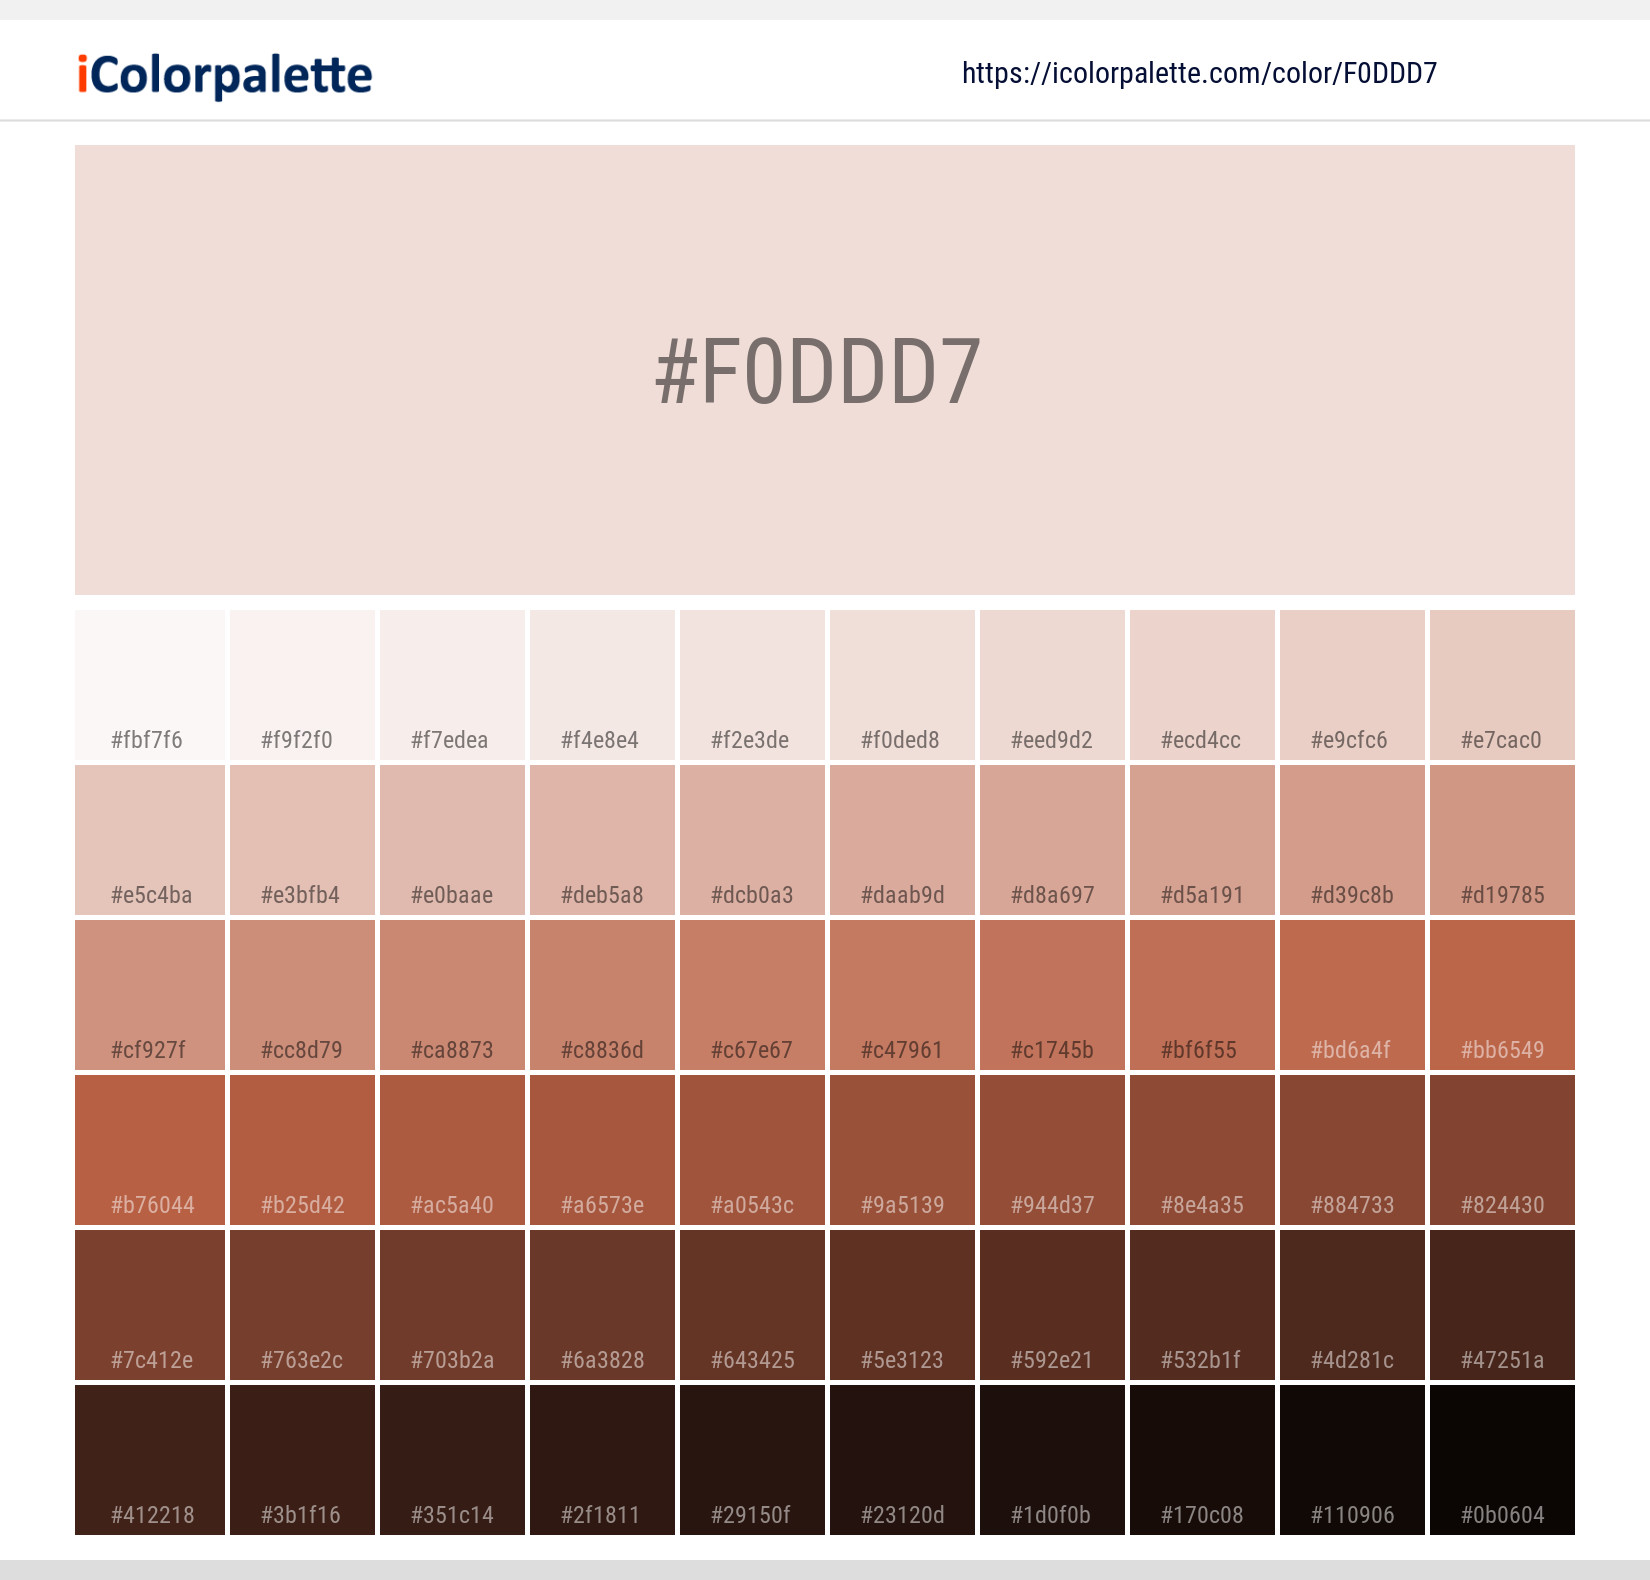 https://www.icolorpalette.com/download/shades/f0ddd7_color_shades.jpg